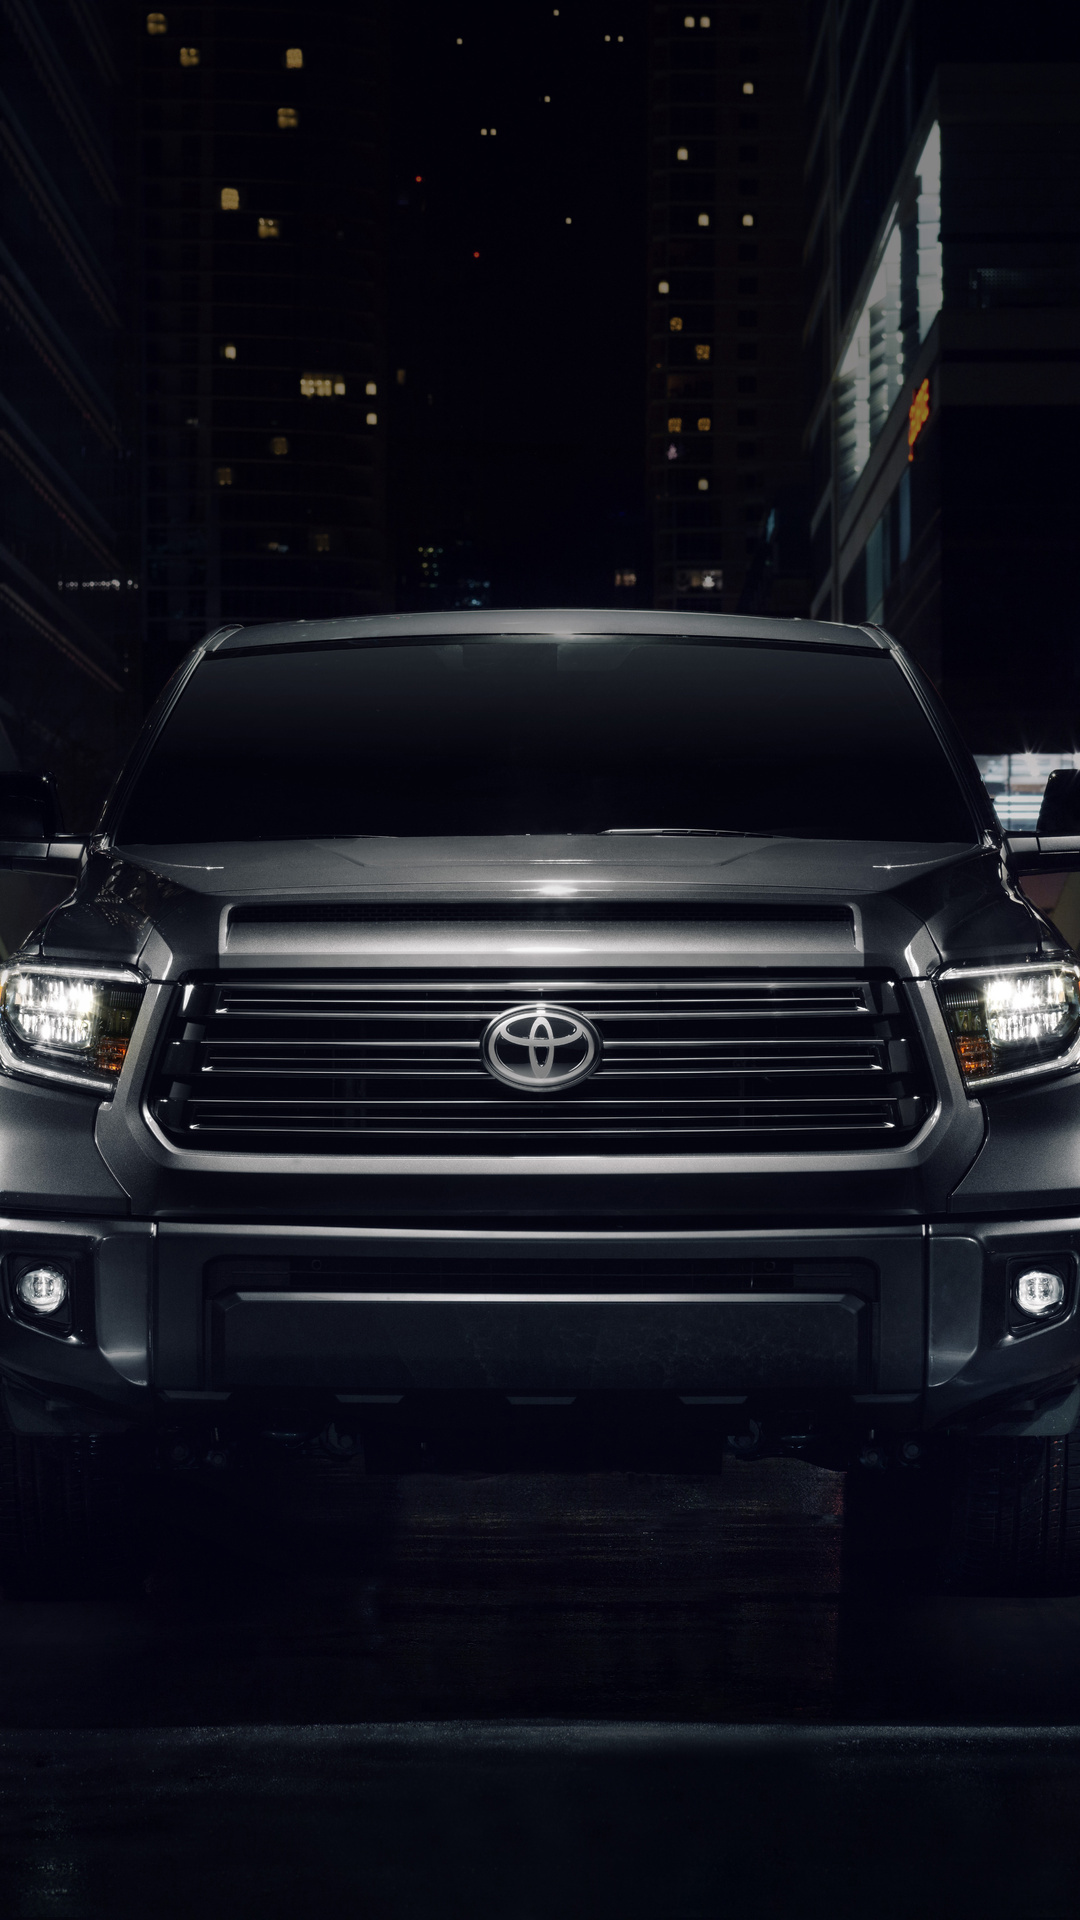 Toyota Tundra, Nightshade edition, Crewmax cab, High-quality images, 1080x1920 Full HD Phone